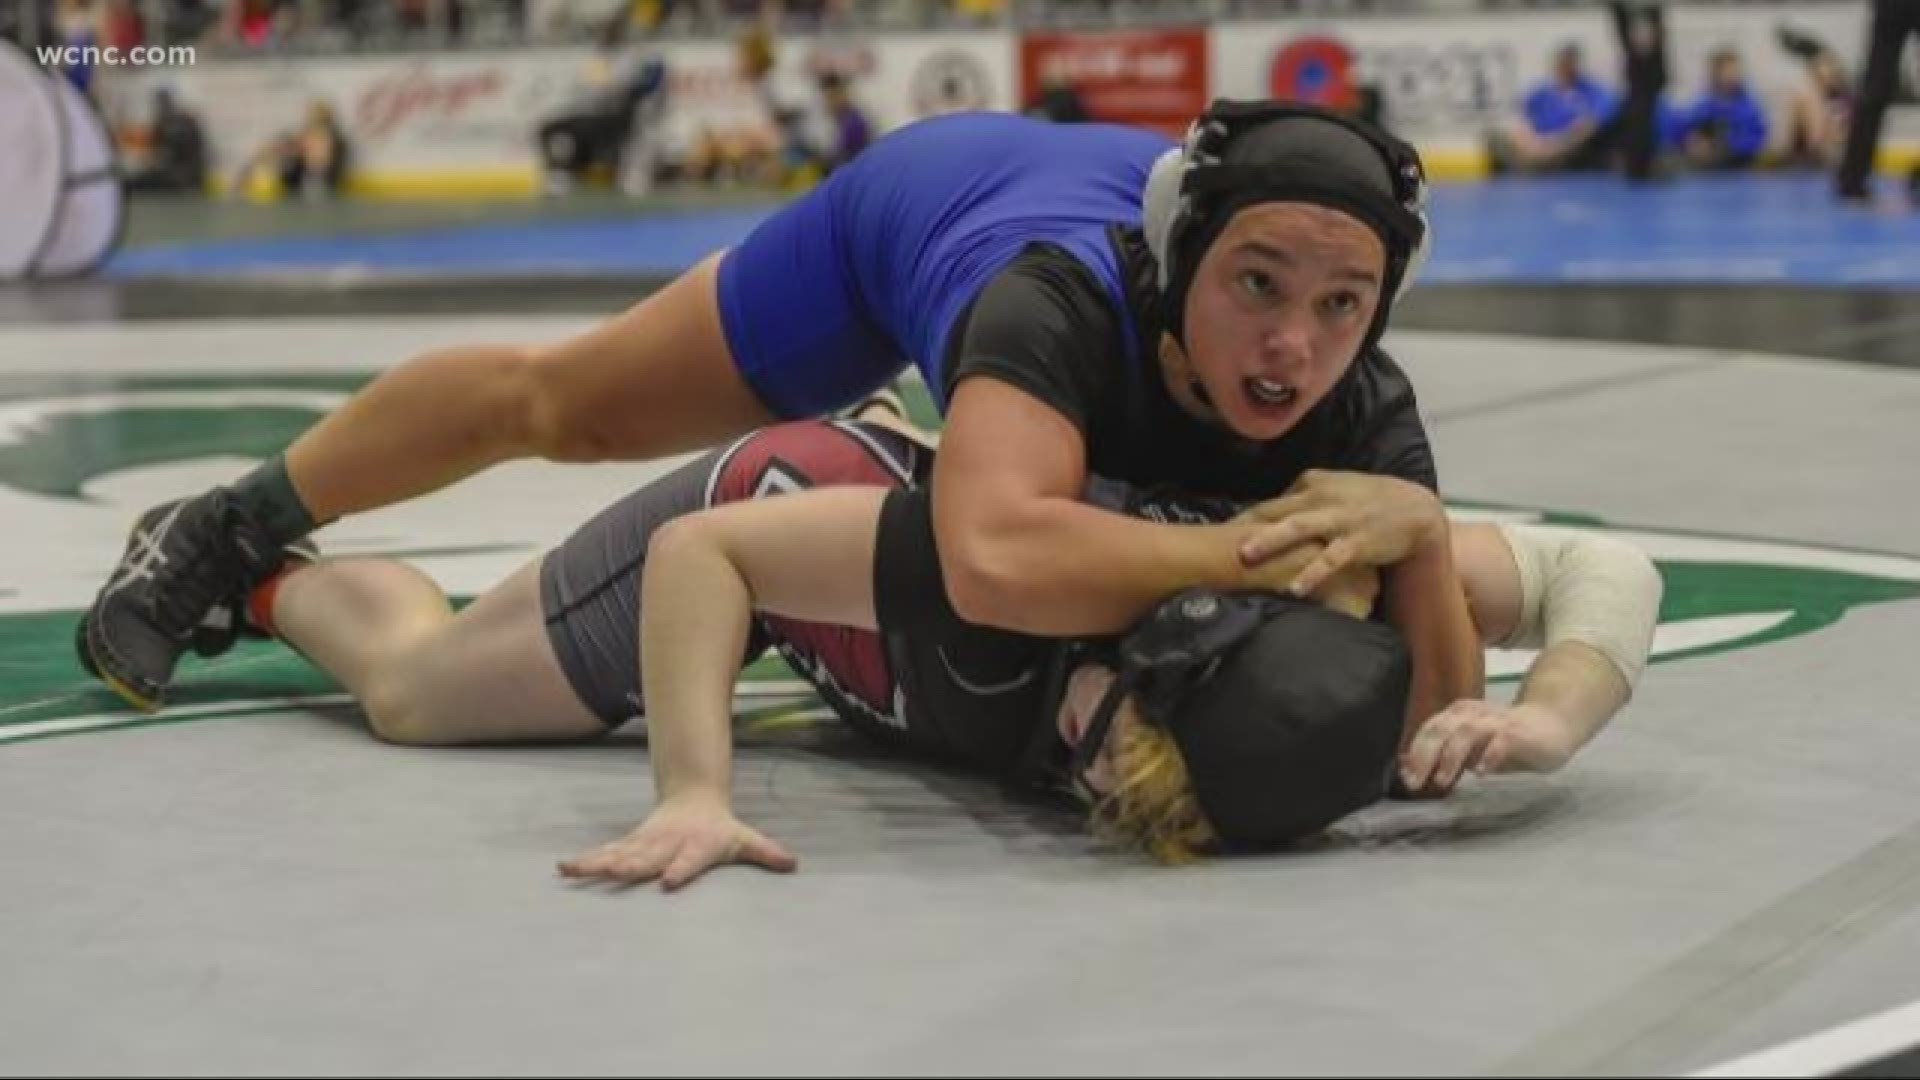 This was the first year the NCHSAA held a girls wrestling state invitational, getting 87 competitors.